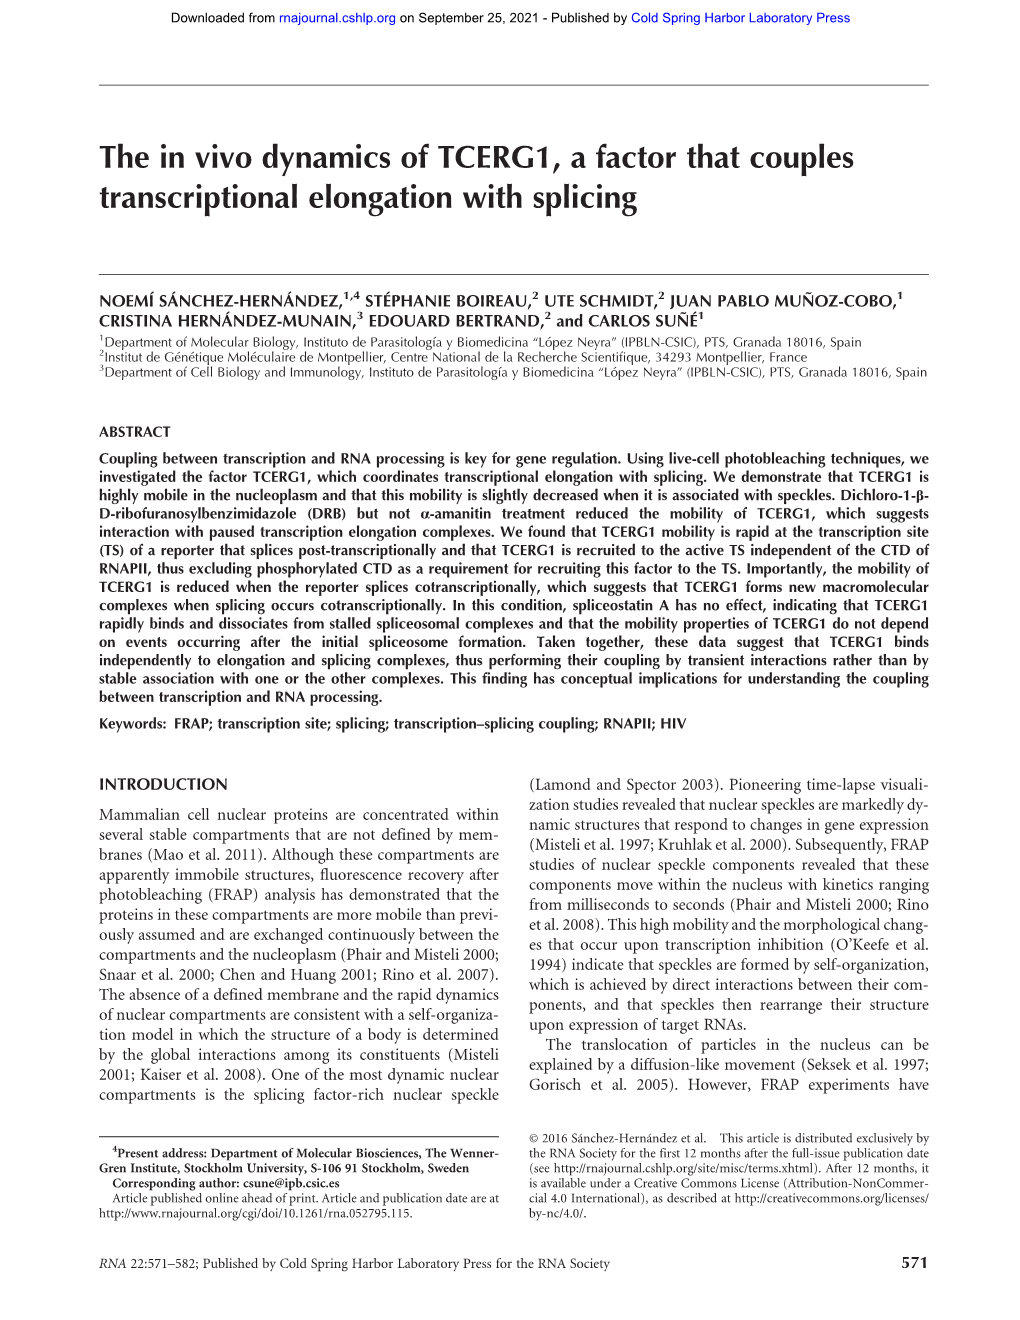 The in Vivo Dynamics of TCERG1, a Factor That Couples Transcriptional Elongation with Splicing